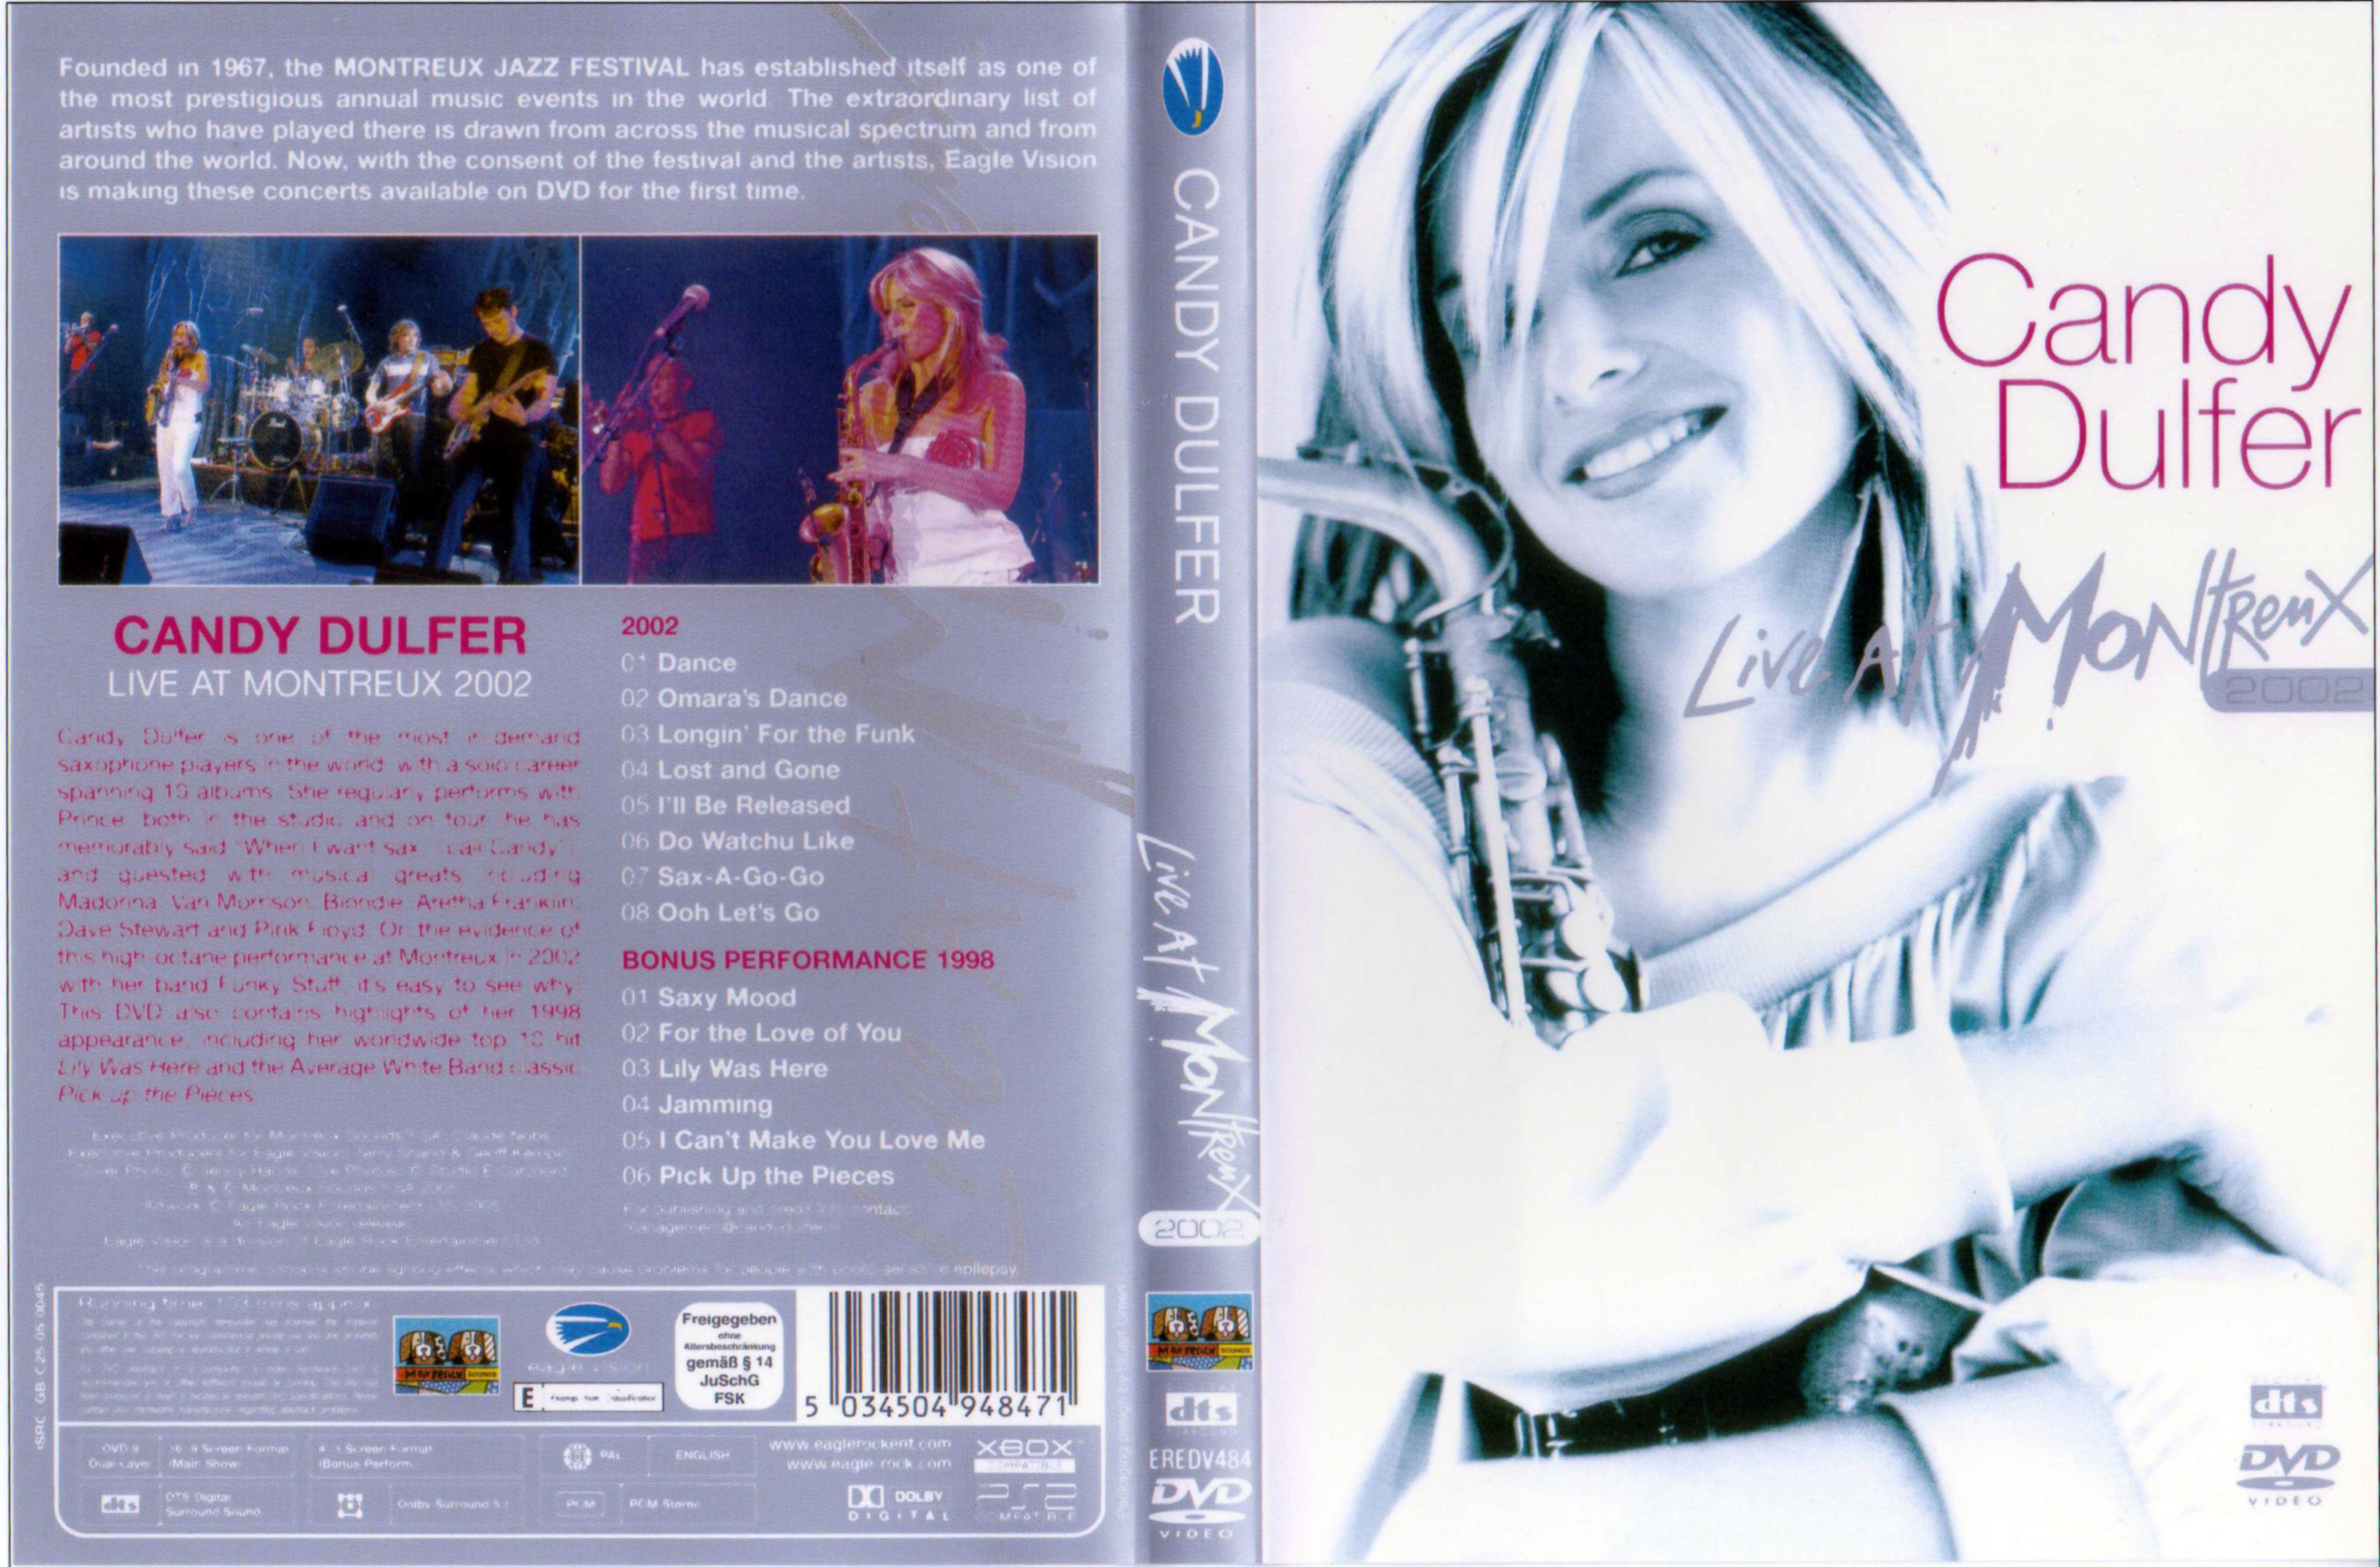 Jaquette DVD Candy Dulfer Live at Montreux